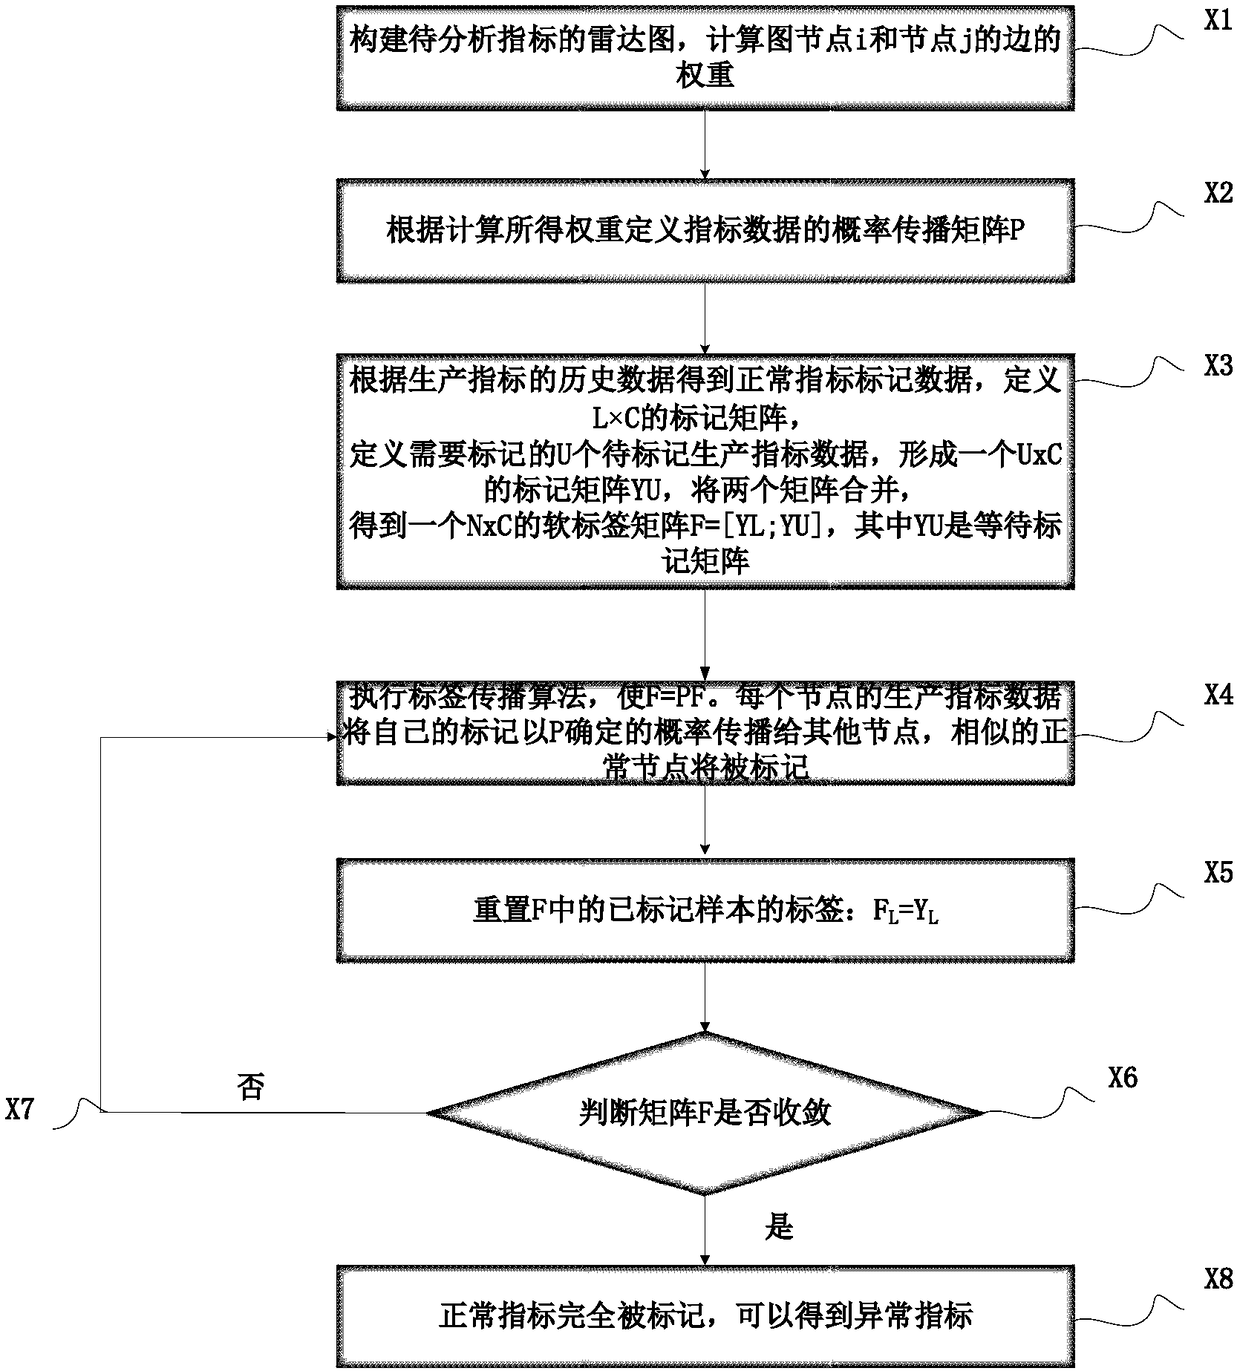 Ore dressing production index visual analysis system and method thereof